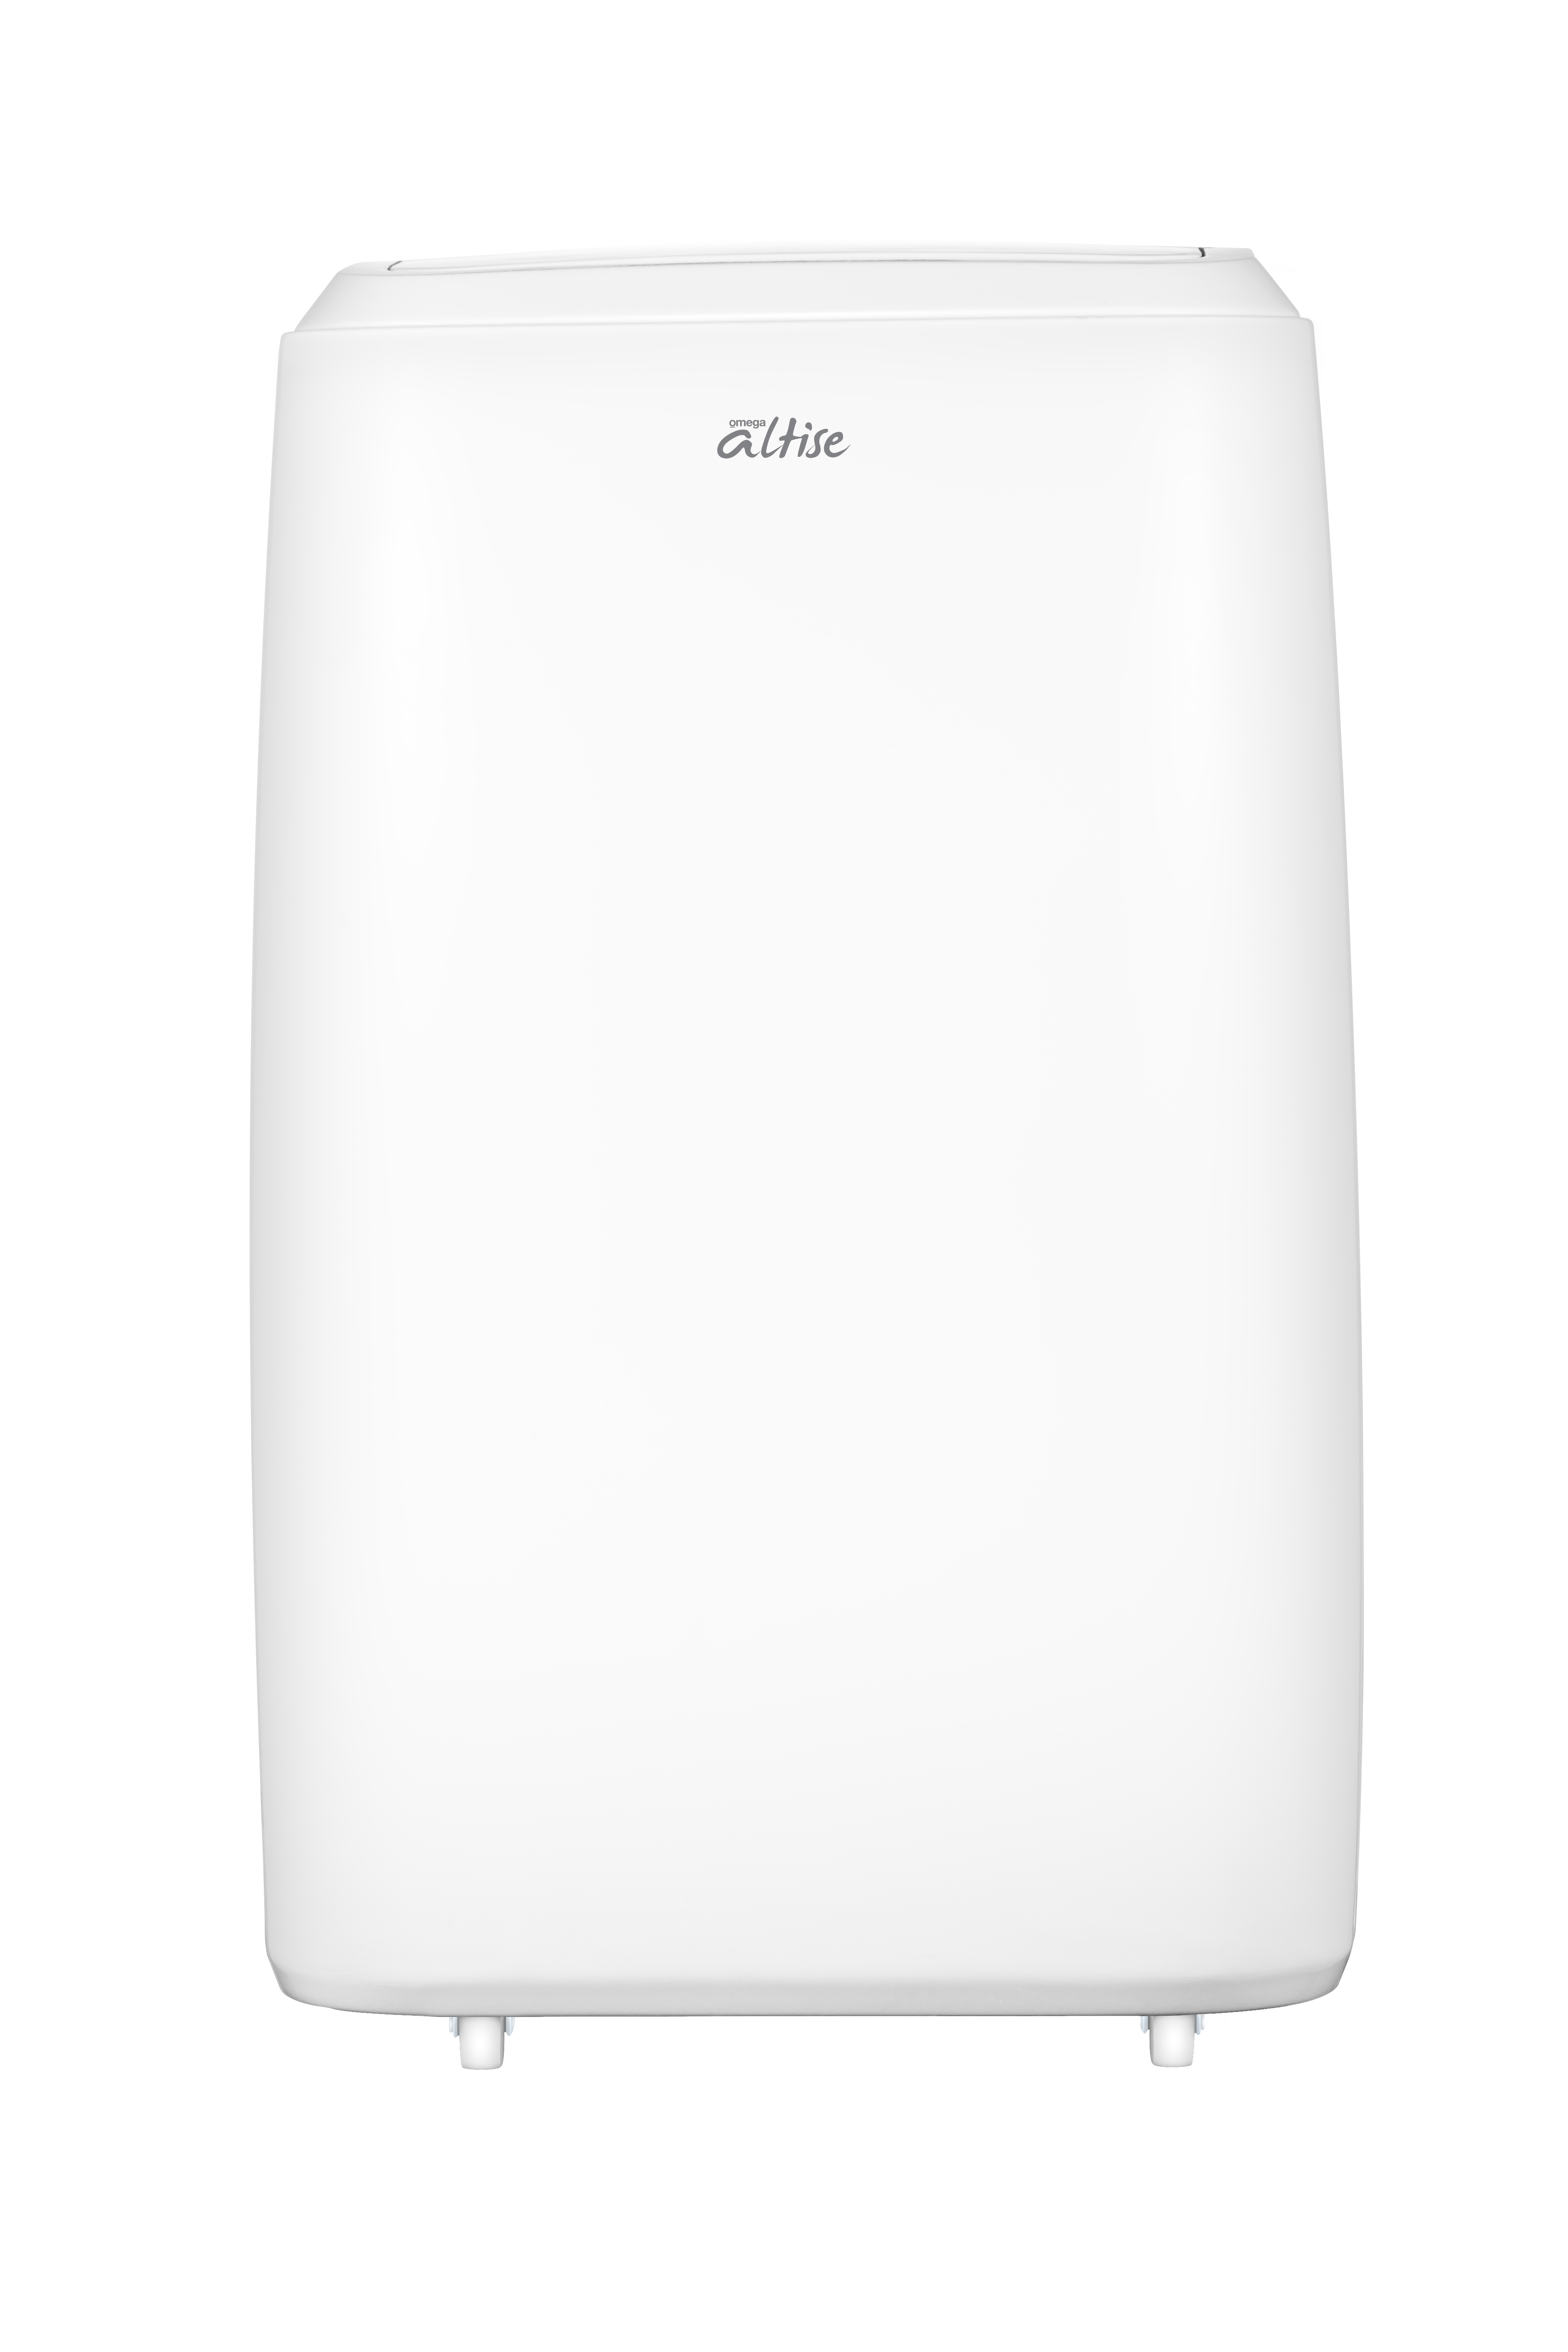 Omega Altise product 4kW Slimline Portable Air-Conditioner OAPC147